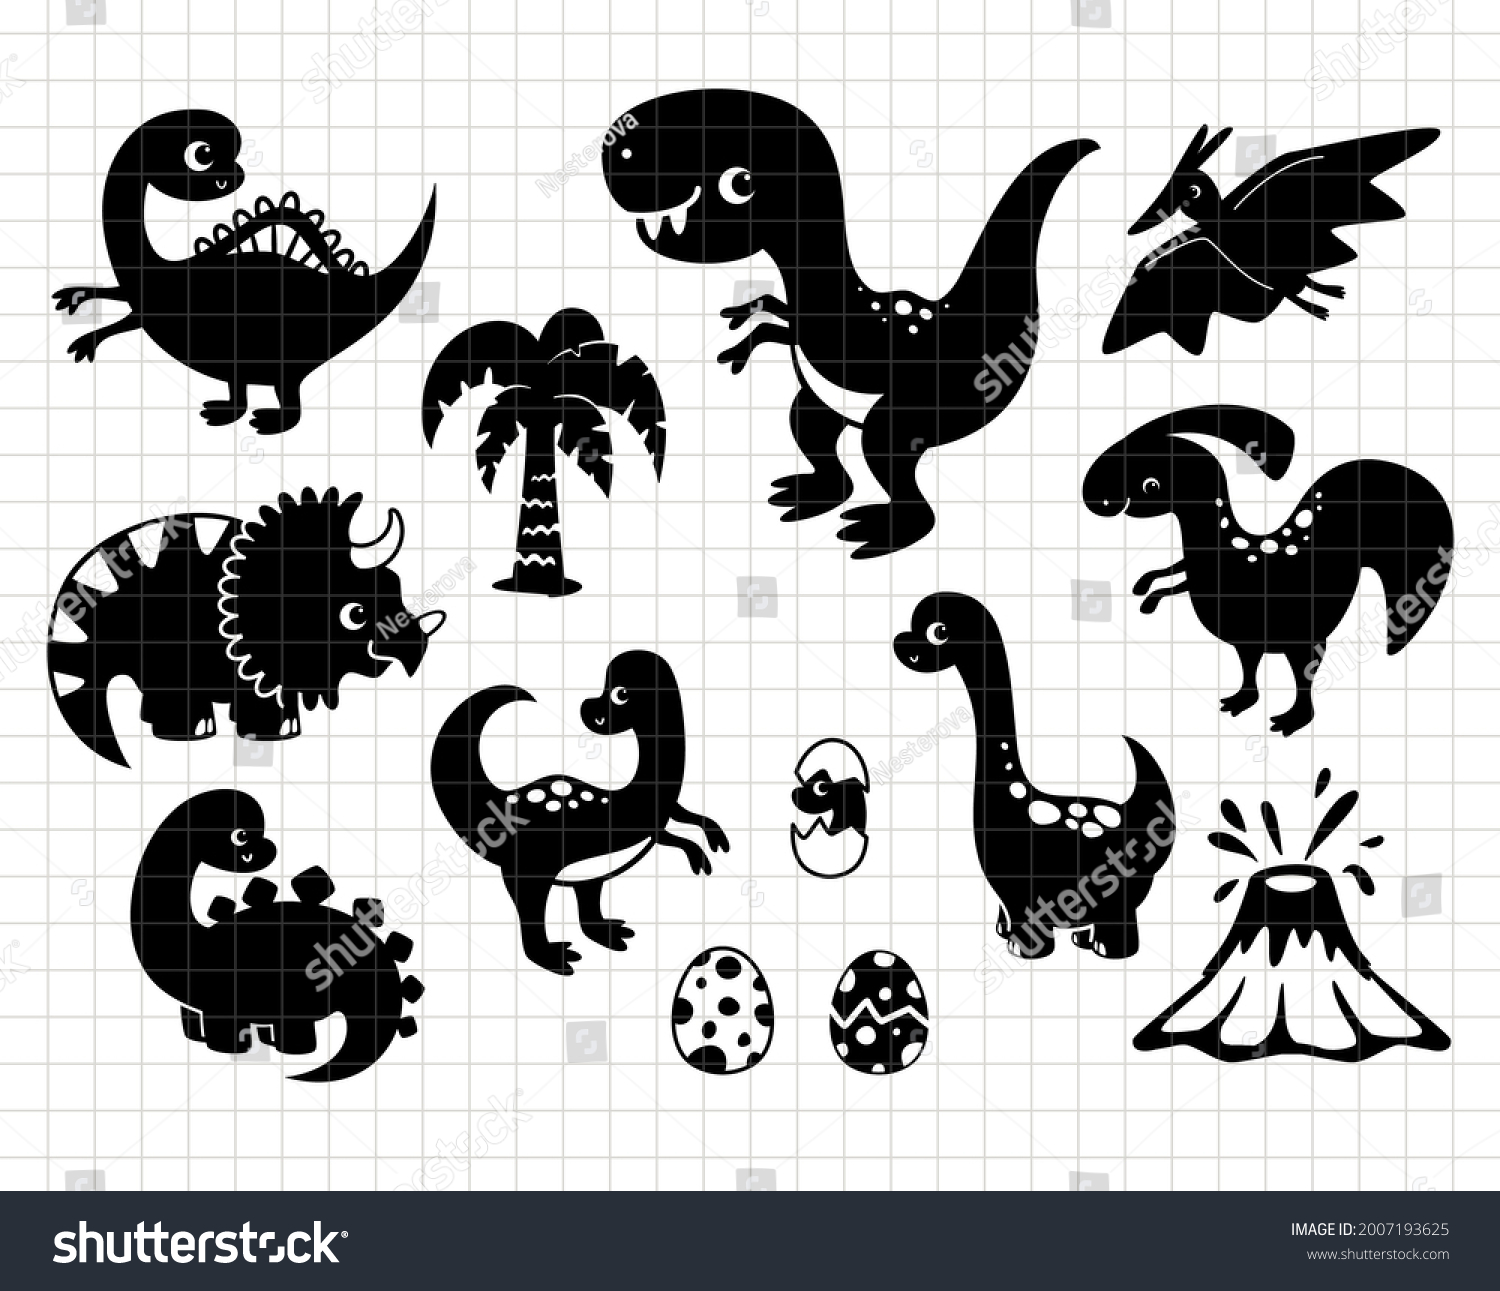 SVG of Funny dinosaurs cartoon clip art. Silhouette vector flat illustration. Cutting file. Suitable for cutting software. Cricut, Silhouette svg